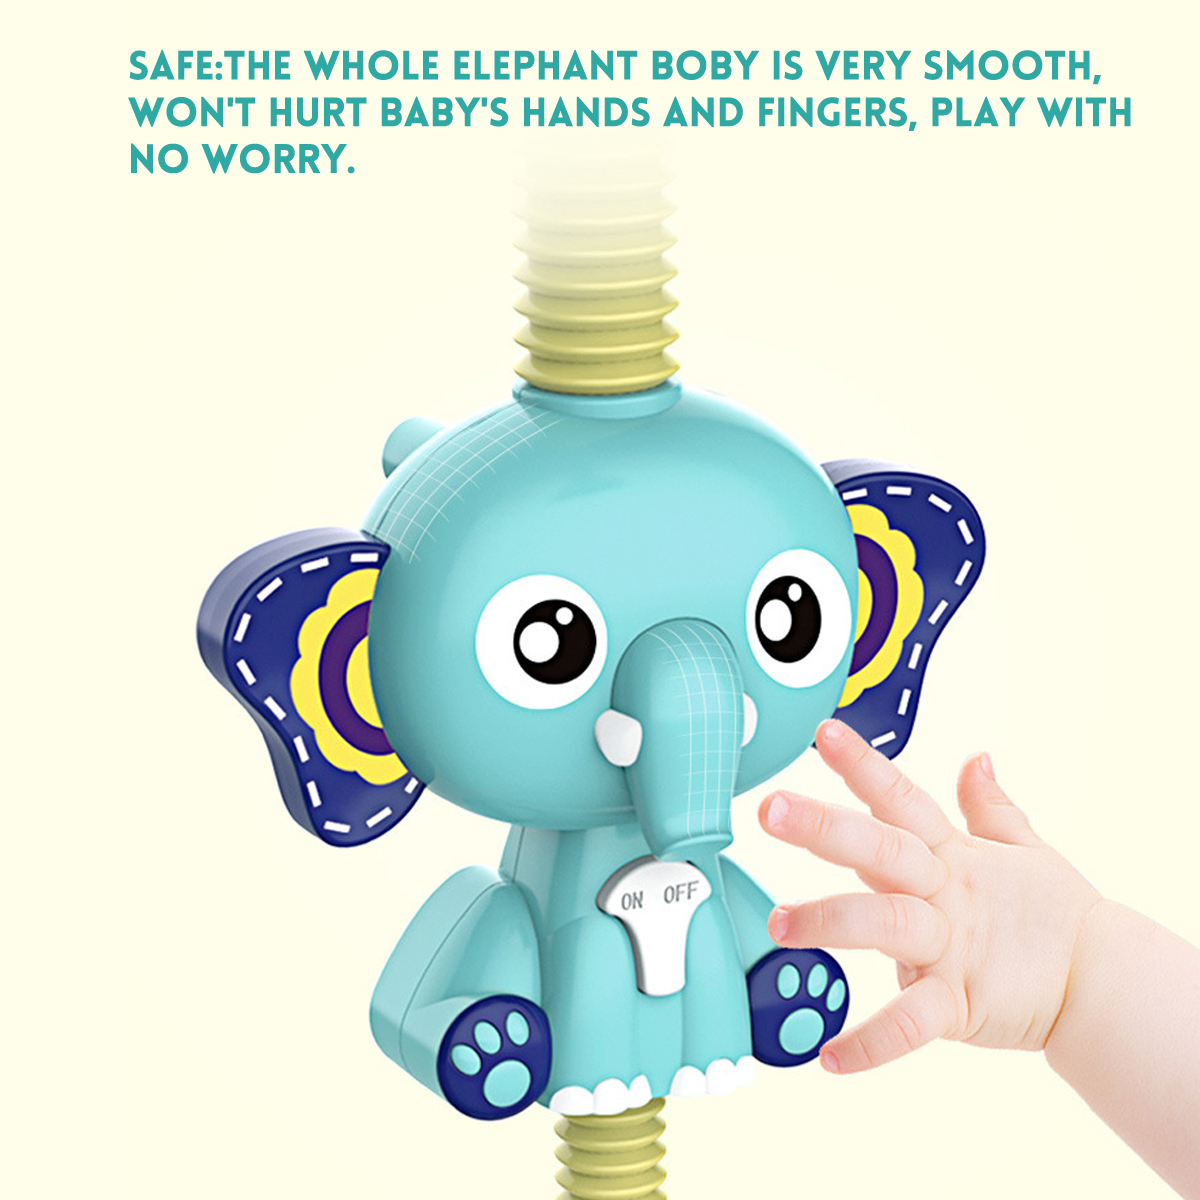 Electric-Elephant-Faucet-Shower-Water-Spray-Baby-Bath-Toy-Two-Water-Outlet-Modes-for-Kids-Swimming-B-1716355-9